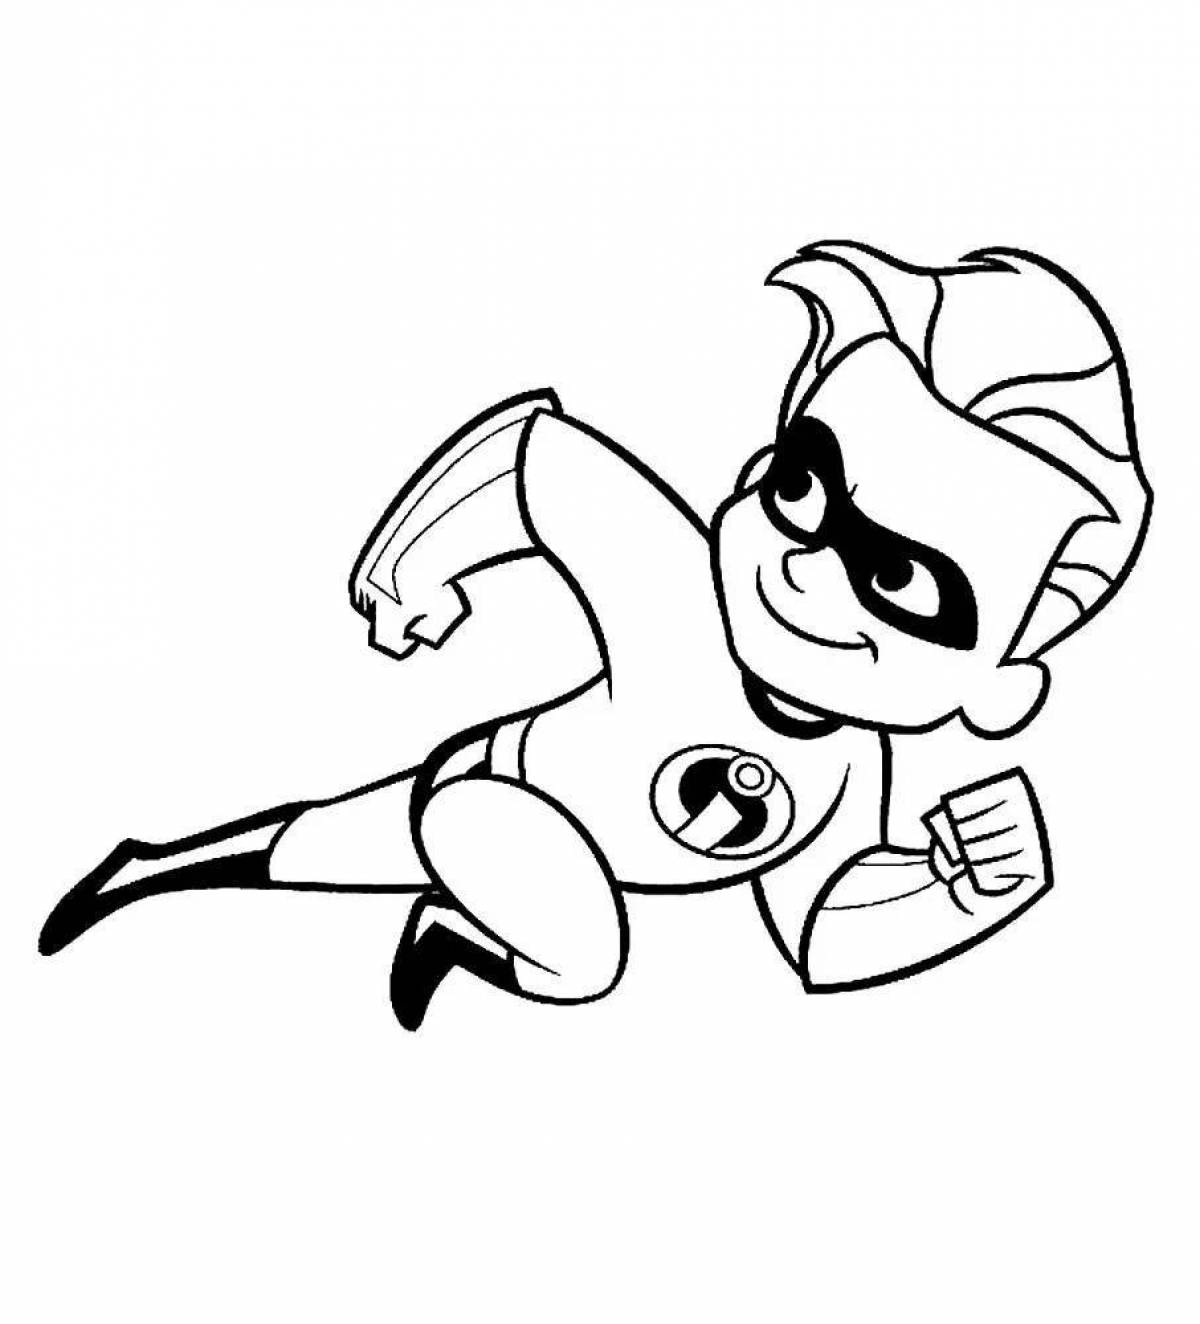 Coloring pages The Incredibles for kids